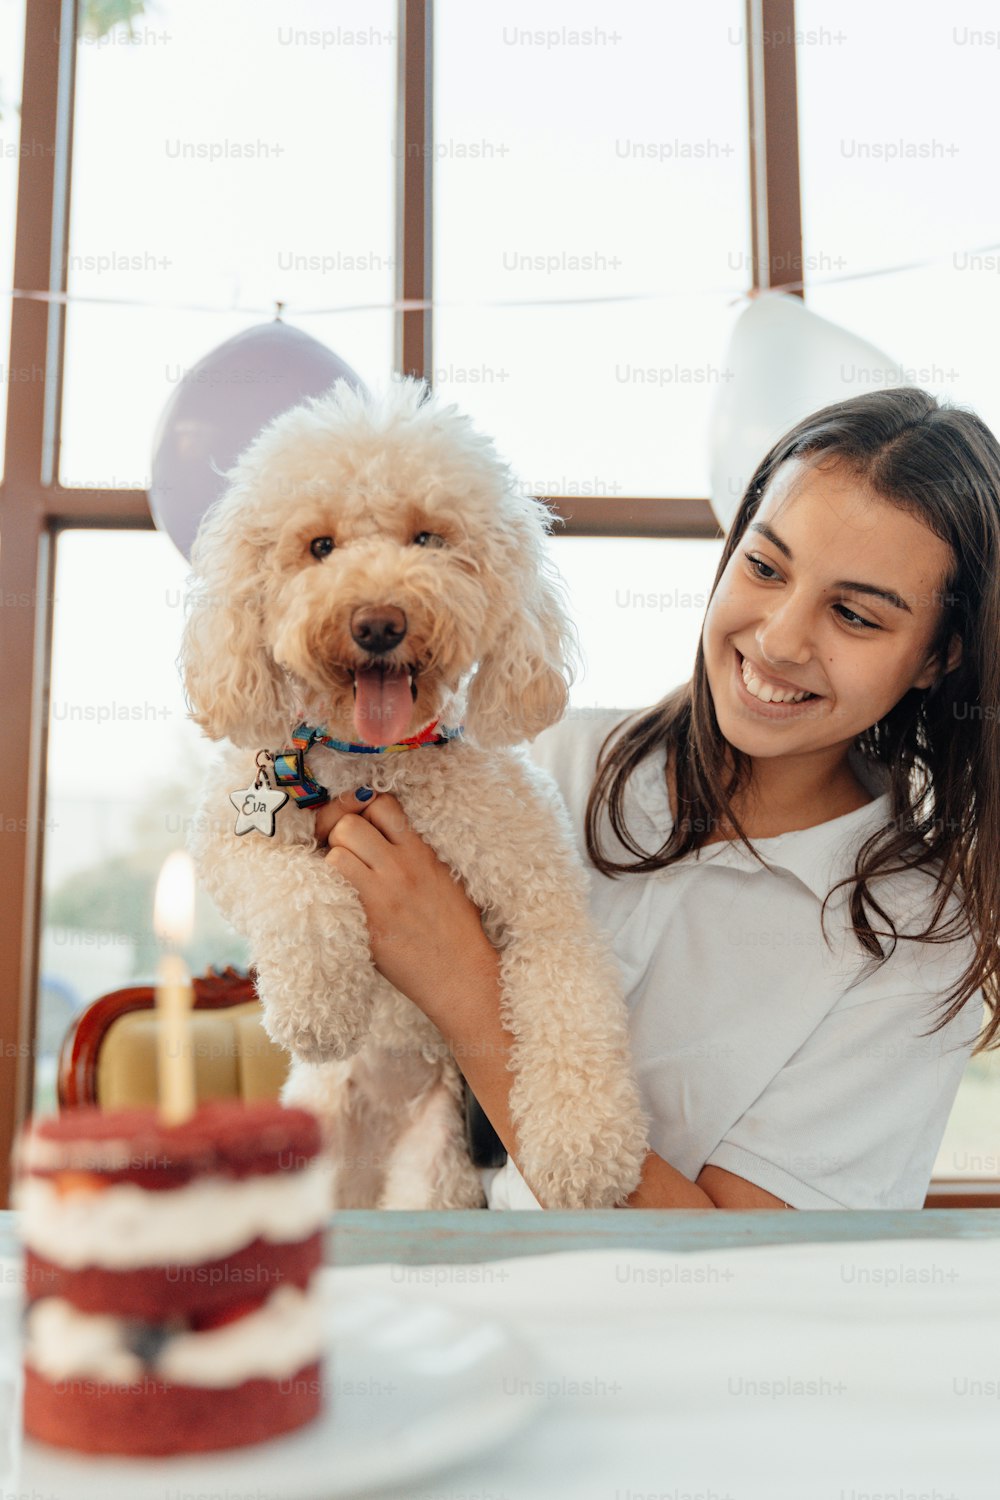 a girl holding a dog in front of a birthday cake